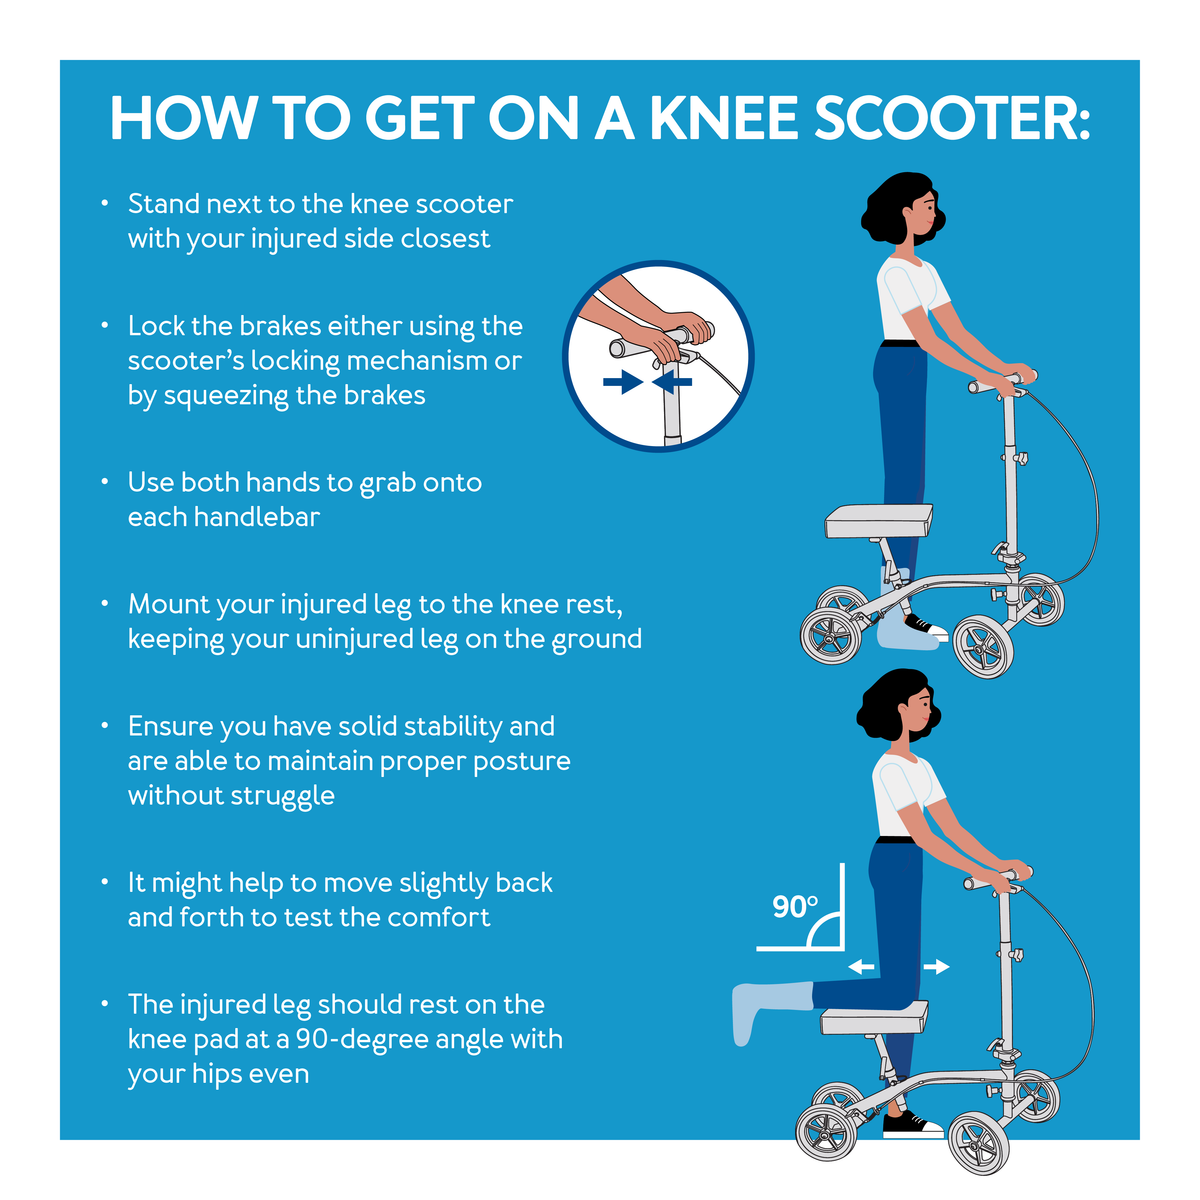 How to get on a knee scooter,further details are provided below.